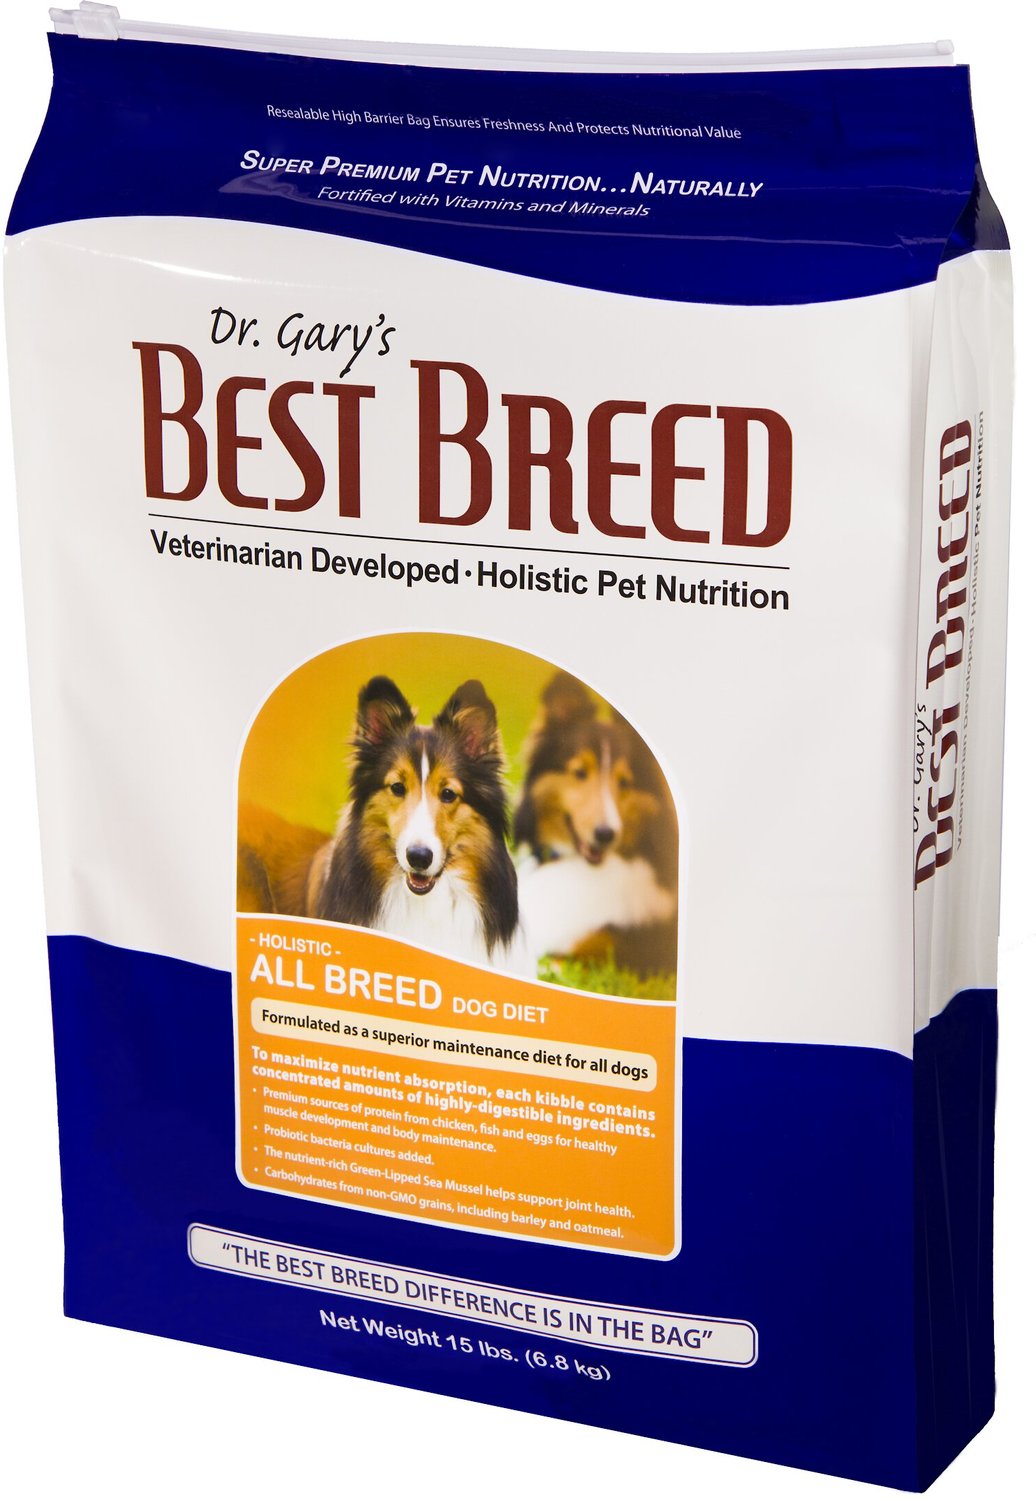 Dr. Gary's Best Breed Holistic All Breed Dry Dog Food, 15lb bag